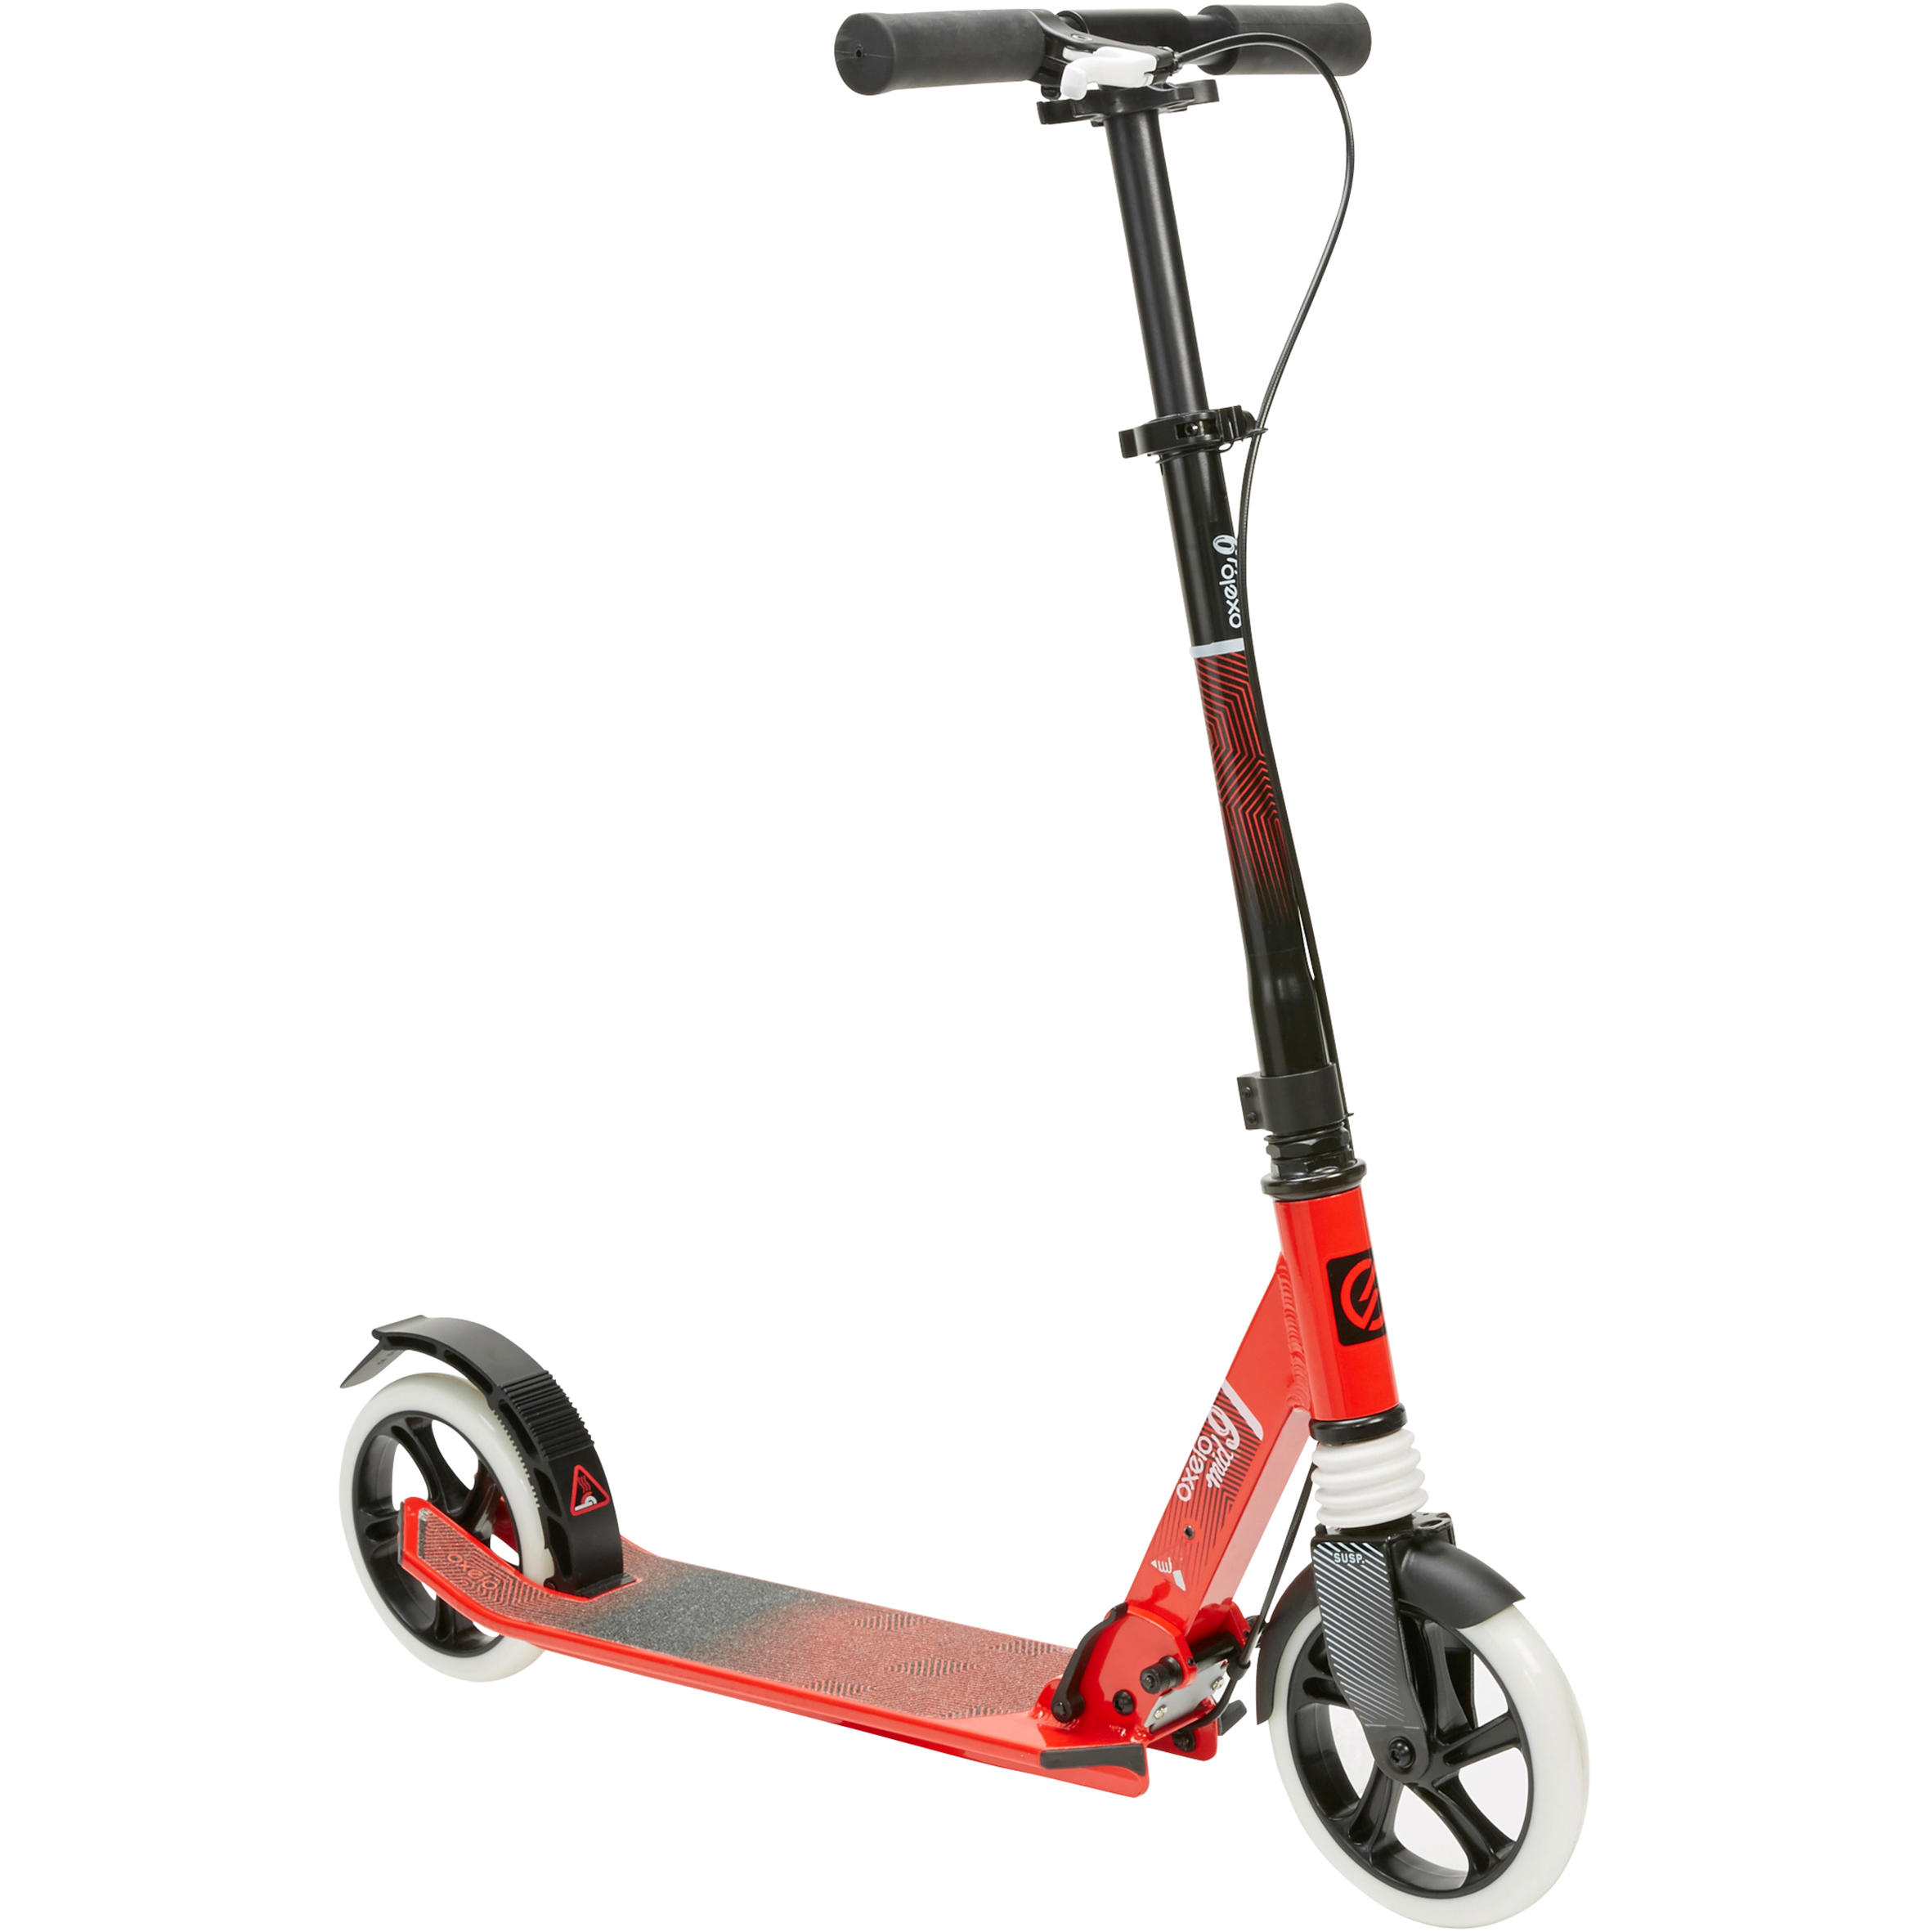 2 wheel scooter for 9 year old